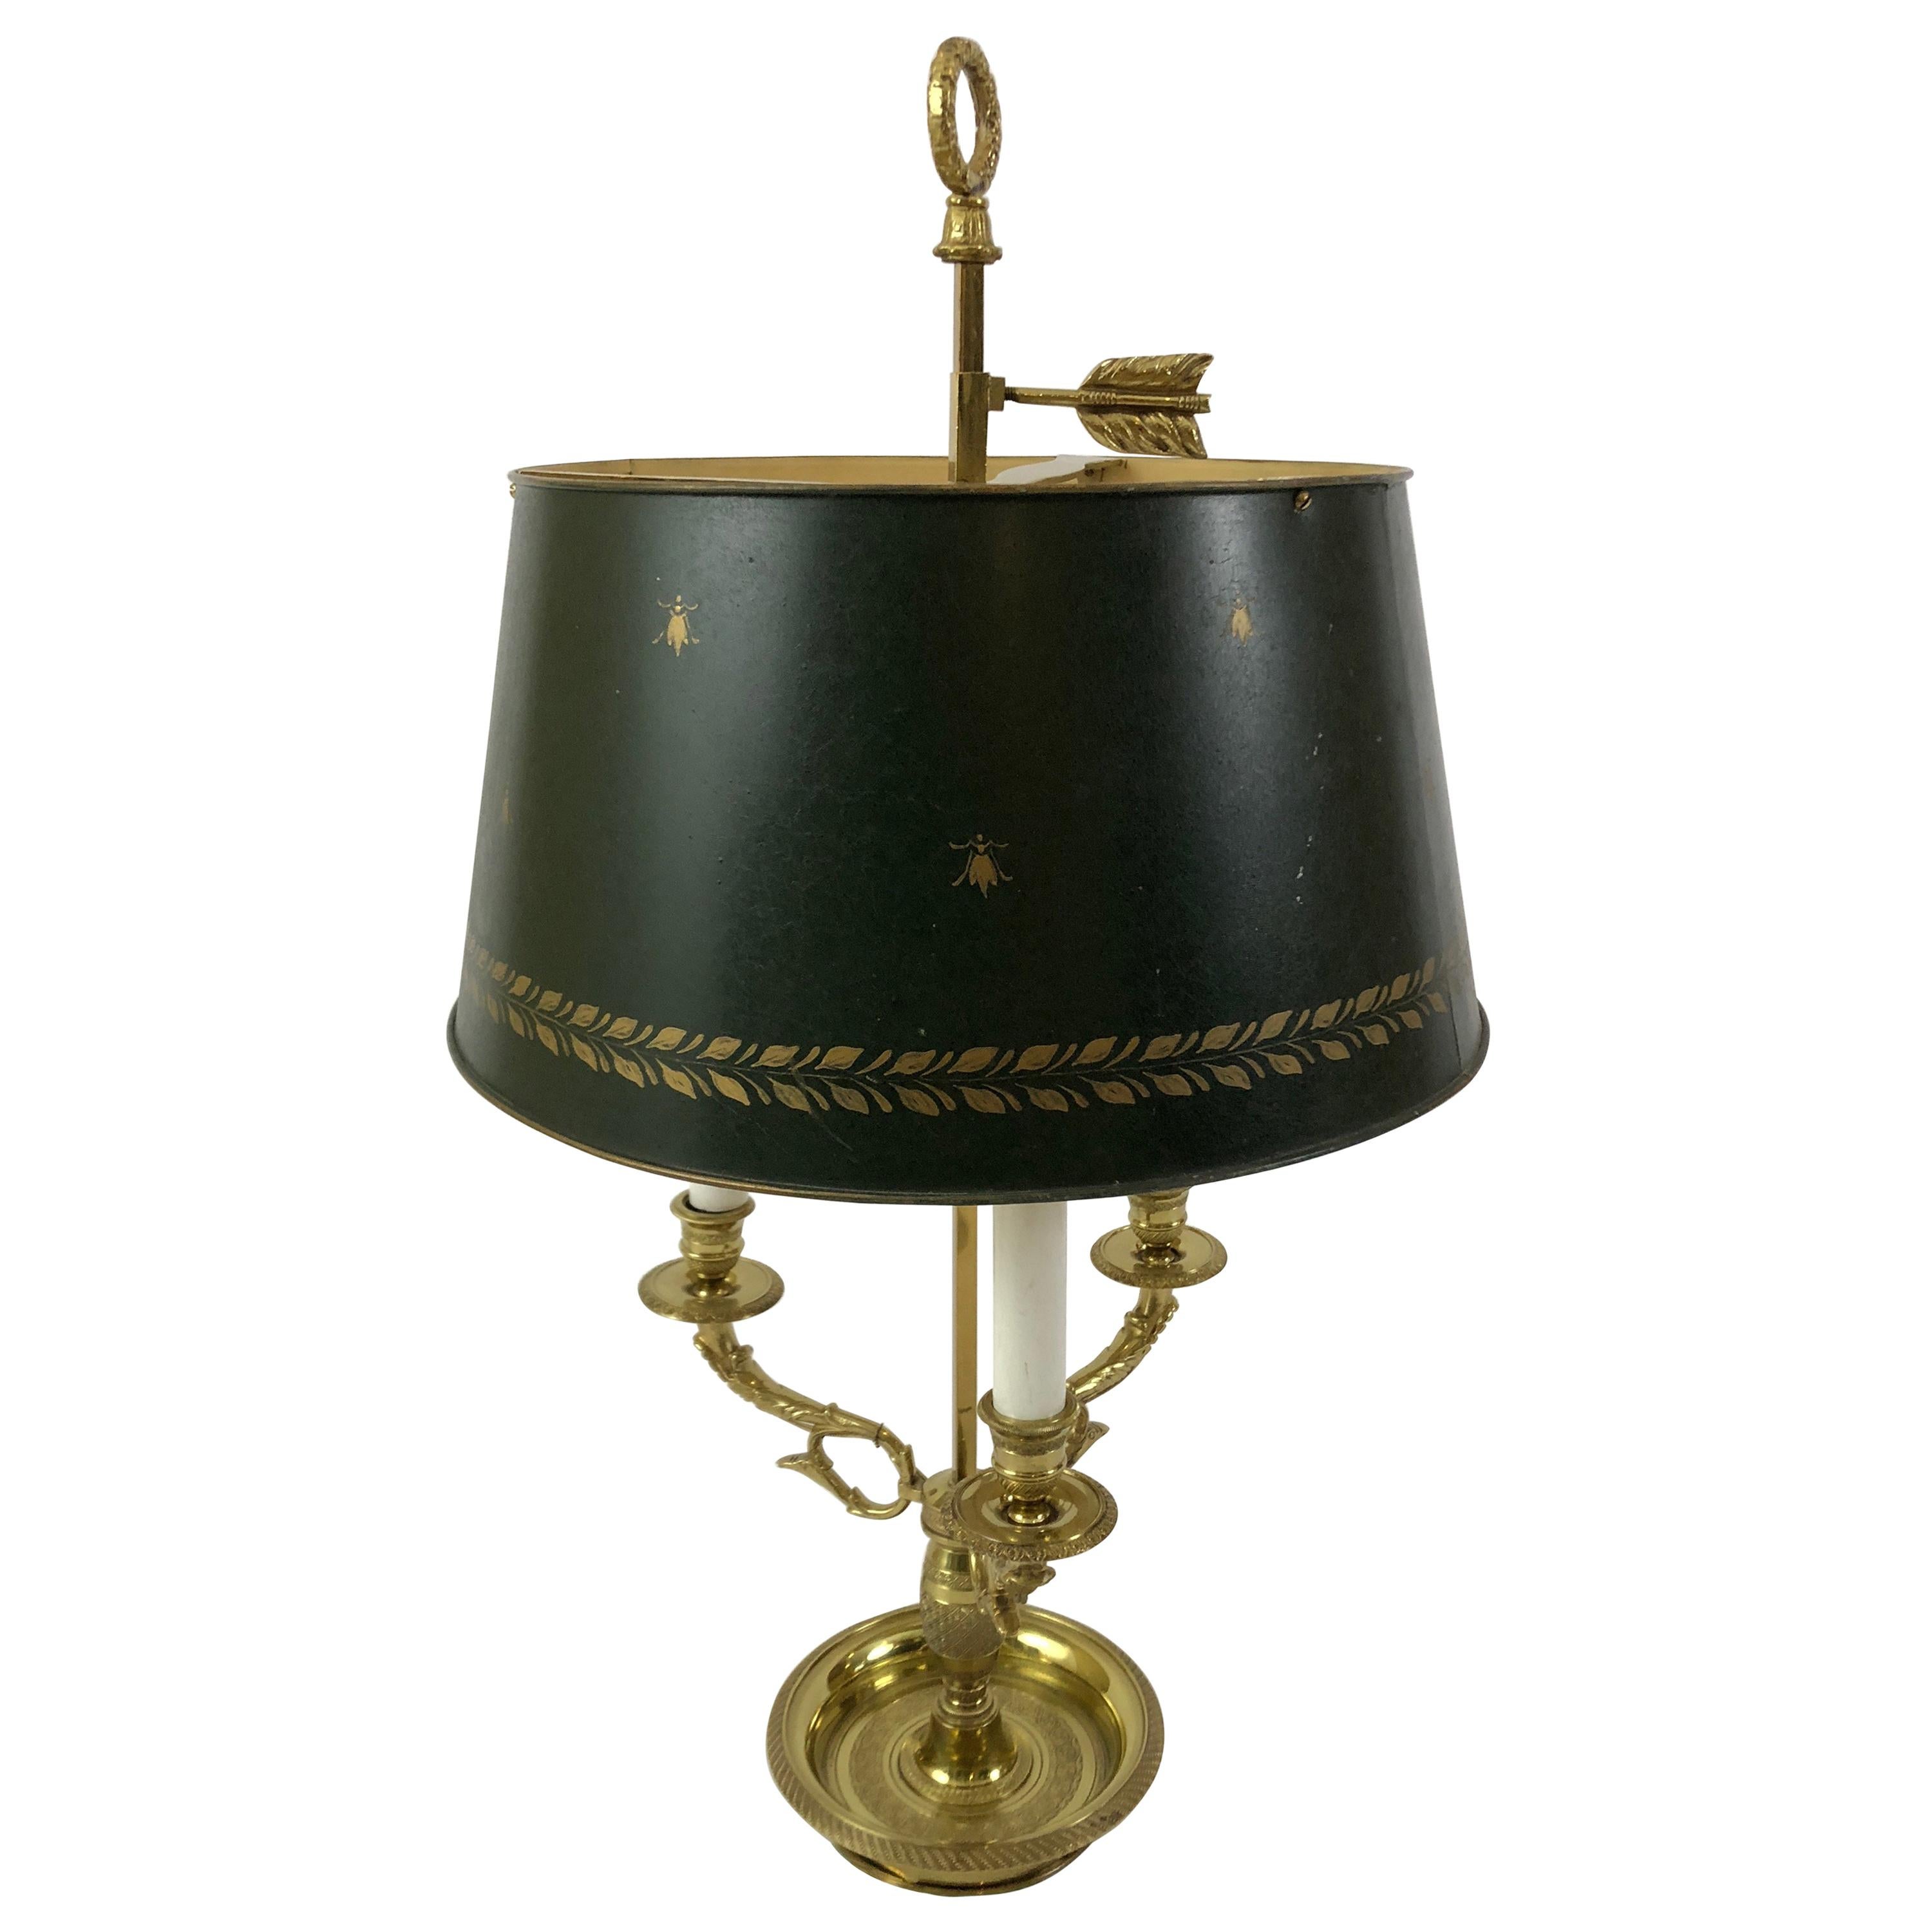 Wonderful Classic French Bouillotte Lamp with Tin Shade